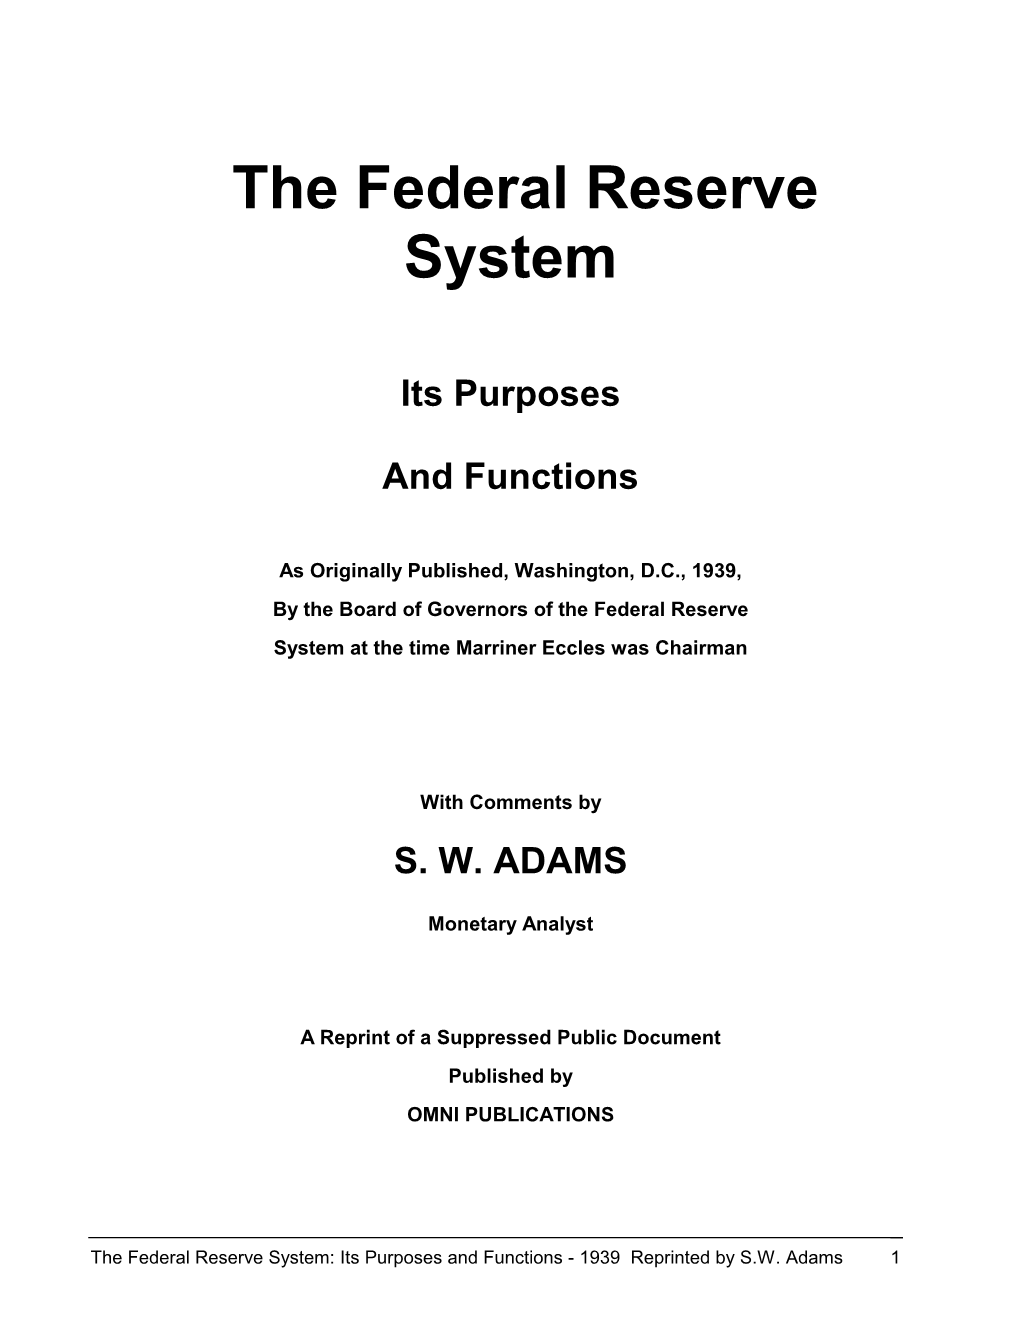 The Federal Reserve System: Its Purposes and Functions - 1939 Reprinted by S.W